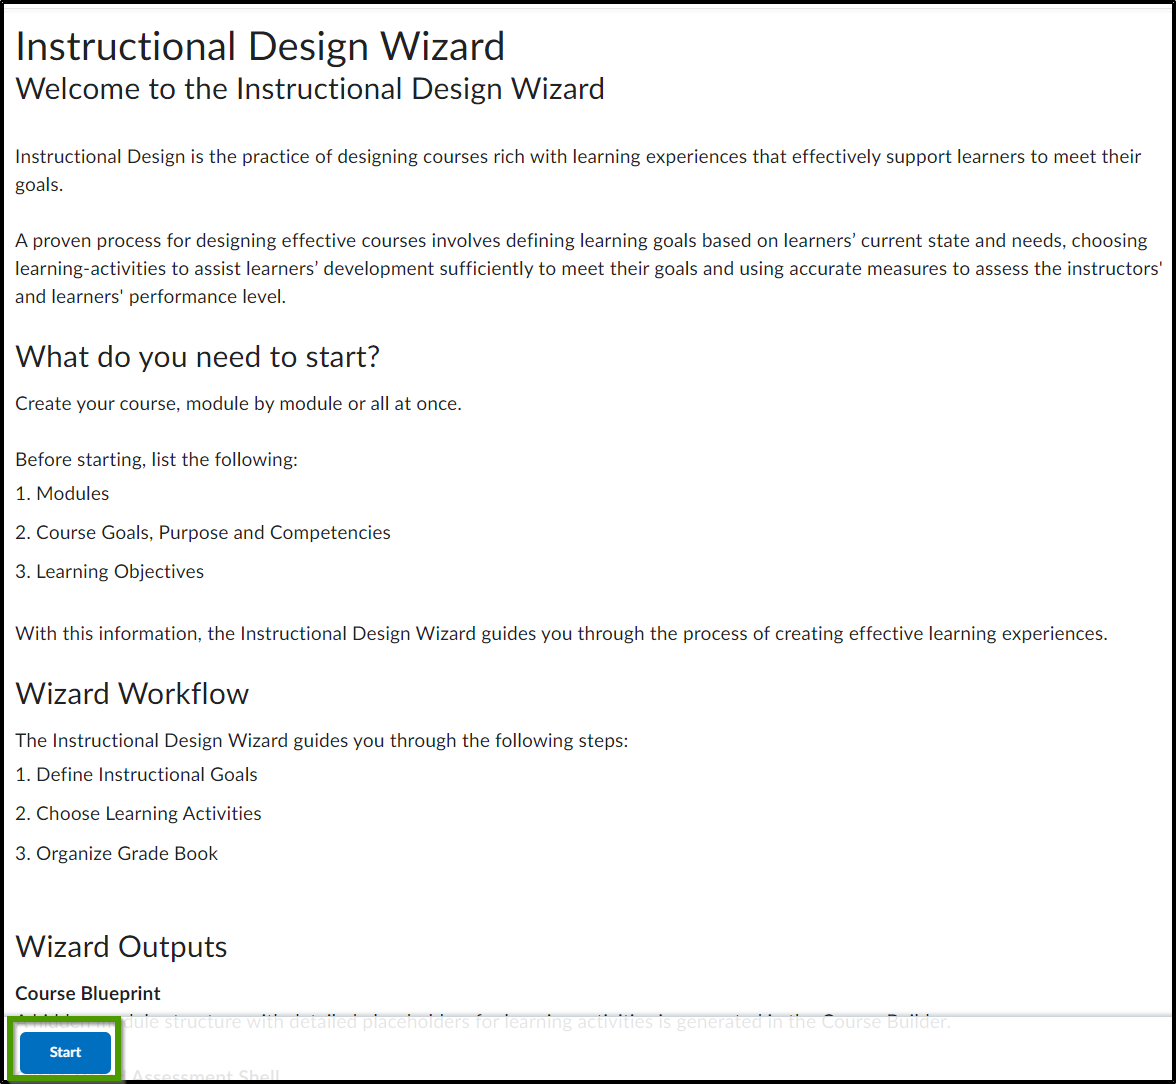 Welcome to the Instructional Design Wizard. Instructional Design is the practice of designing courses rich with learning experiences that effectively support learners to meet their goals. A proven process for designing effective courses involves defining learning goals based on learners’ current state and needs, choosing learning-activities to assist learners’ development sufficiently to meet their goals and using accurate measures to assess the instructors' and learners' performance level. What do you need to start: Create your course, module by module or all at once. Before starting, list the following: 1. Modules. 2. Course Goals, Purpose and Competencies. 3. Learning Objectives. With this information, the Instructional Design Wizard guides you through the process of creating effective learning experiences. Wizard Workflow: The Instructional Design Wizard guides you through the following steps: 1. Define Instructional Goals. 2. Choose Learning Activities. 3. Organize Grade Book. Wizard Outputs: Course Blueprint: A hidden module structure with detailed placeholders for learning activities is generated in the Course Builder. Grade-Based Assessment Shell: An organized structure based on your grade system that categorizes your assessments. Objective-Based Assessment Shell: A competency structure used to measure course goals that consist of competencies and learning objectives. Estimated completion time per module - 10 minutes